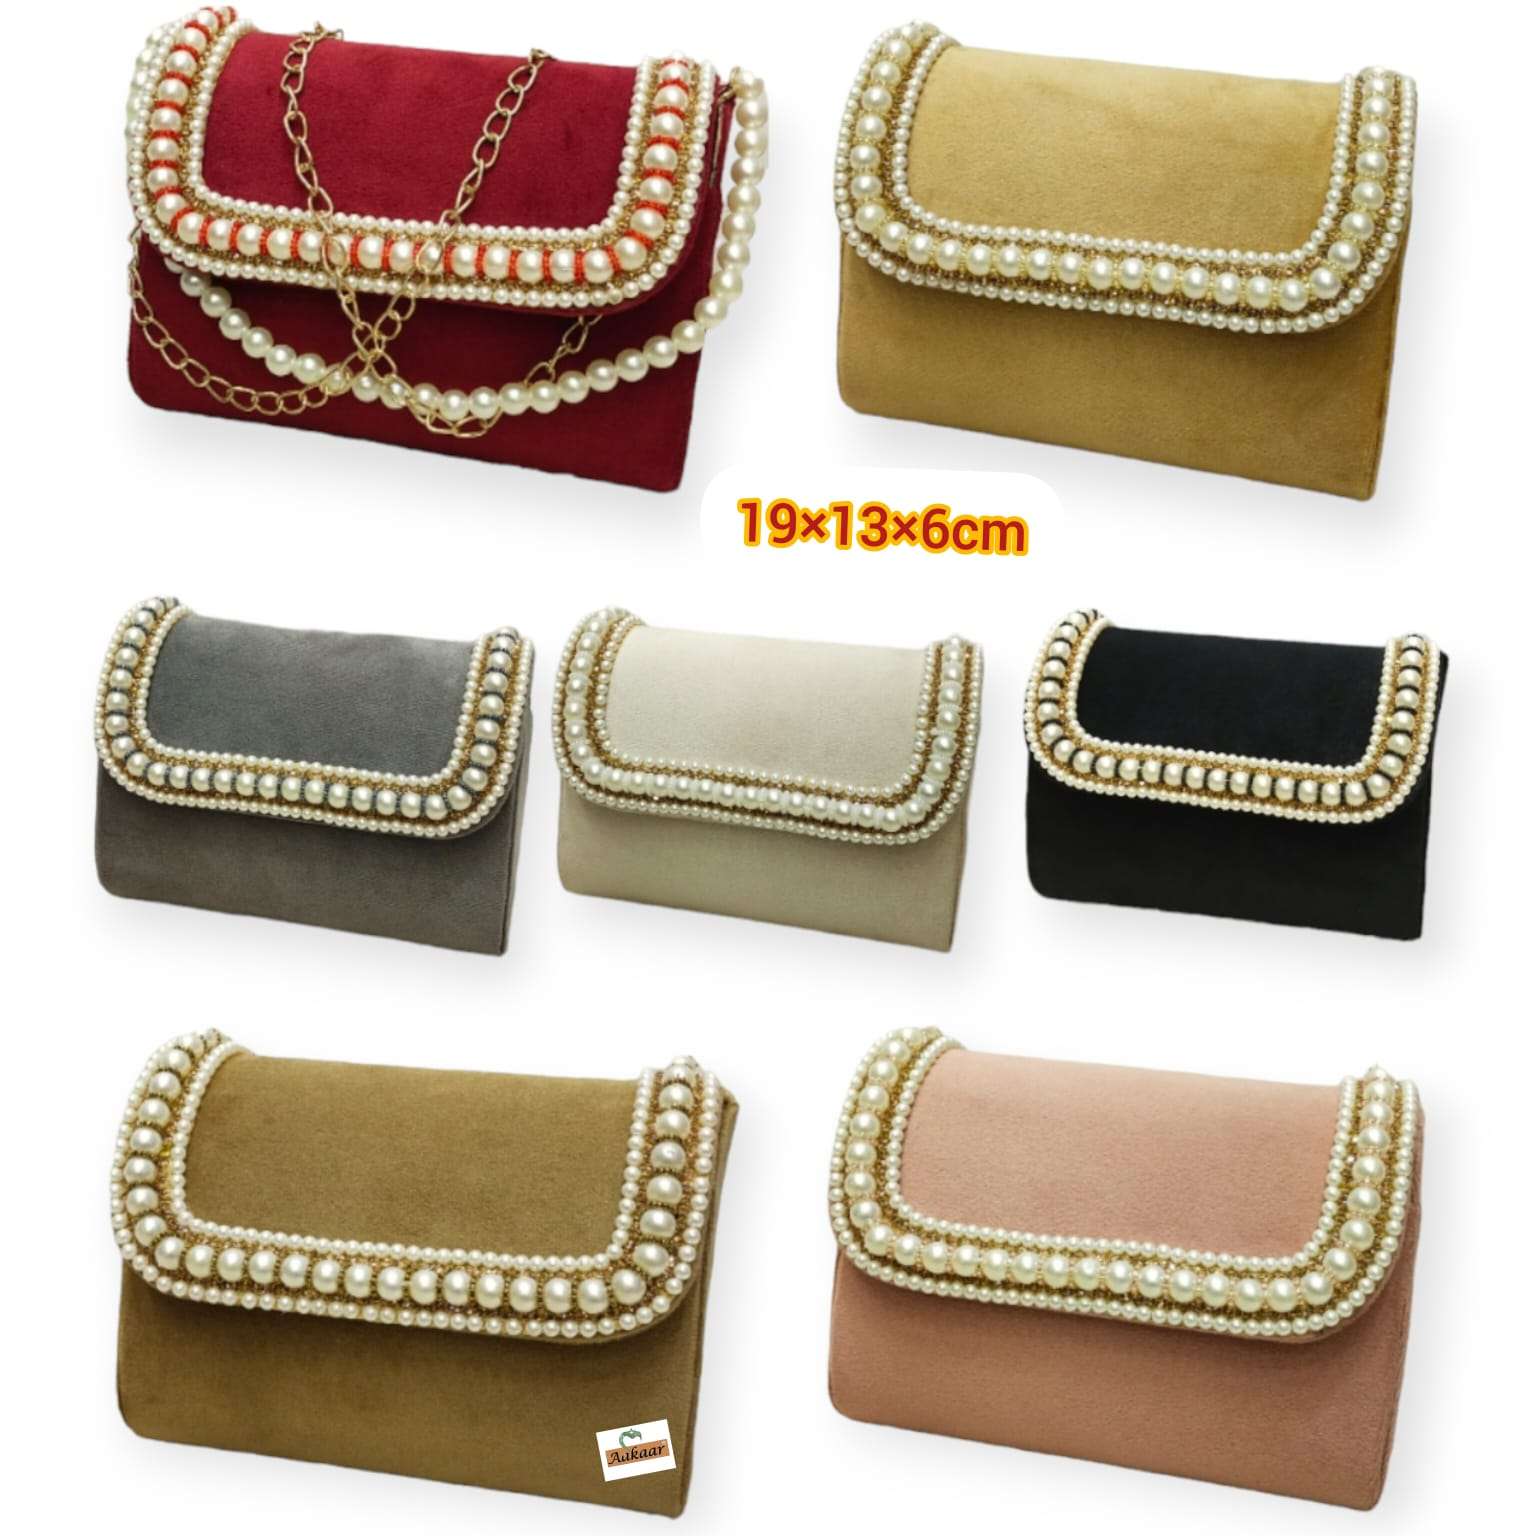 Italian fashion wholesale: suppliers and manufacturers of clothing bags  shoes accessories jewelry